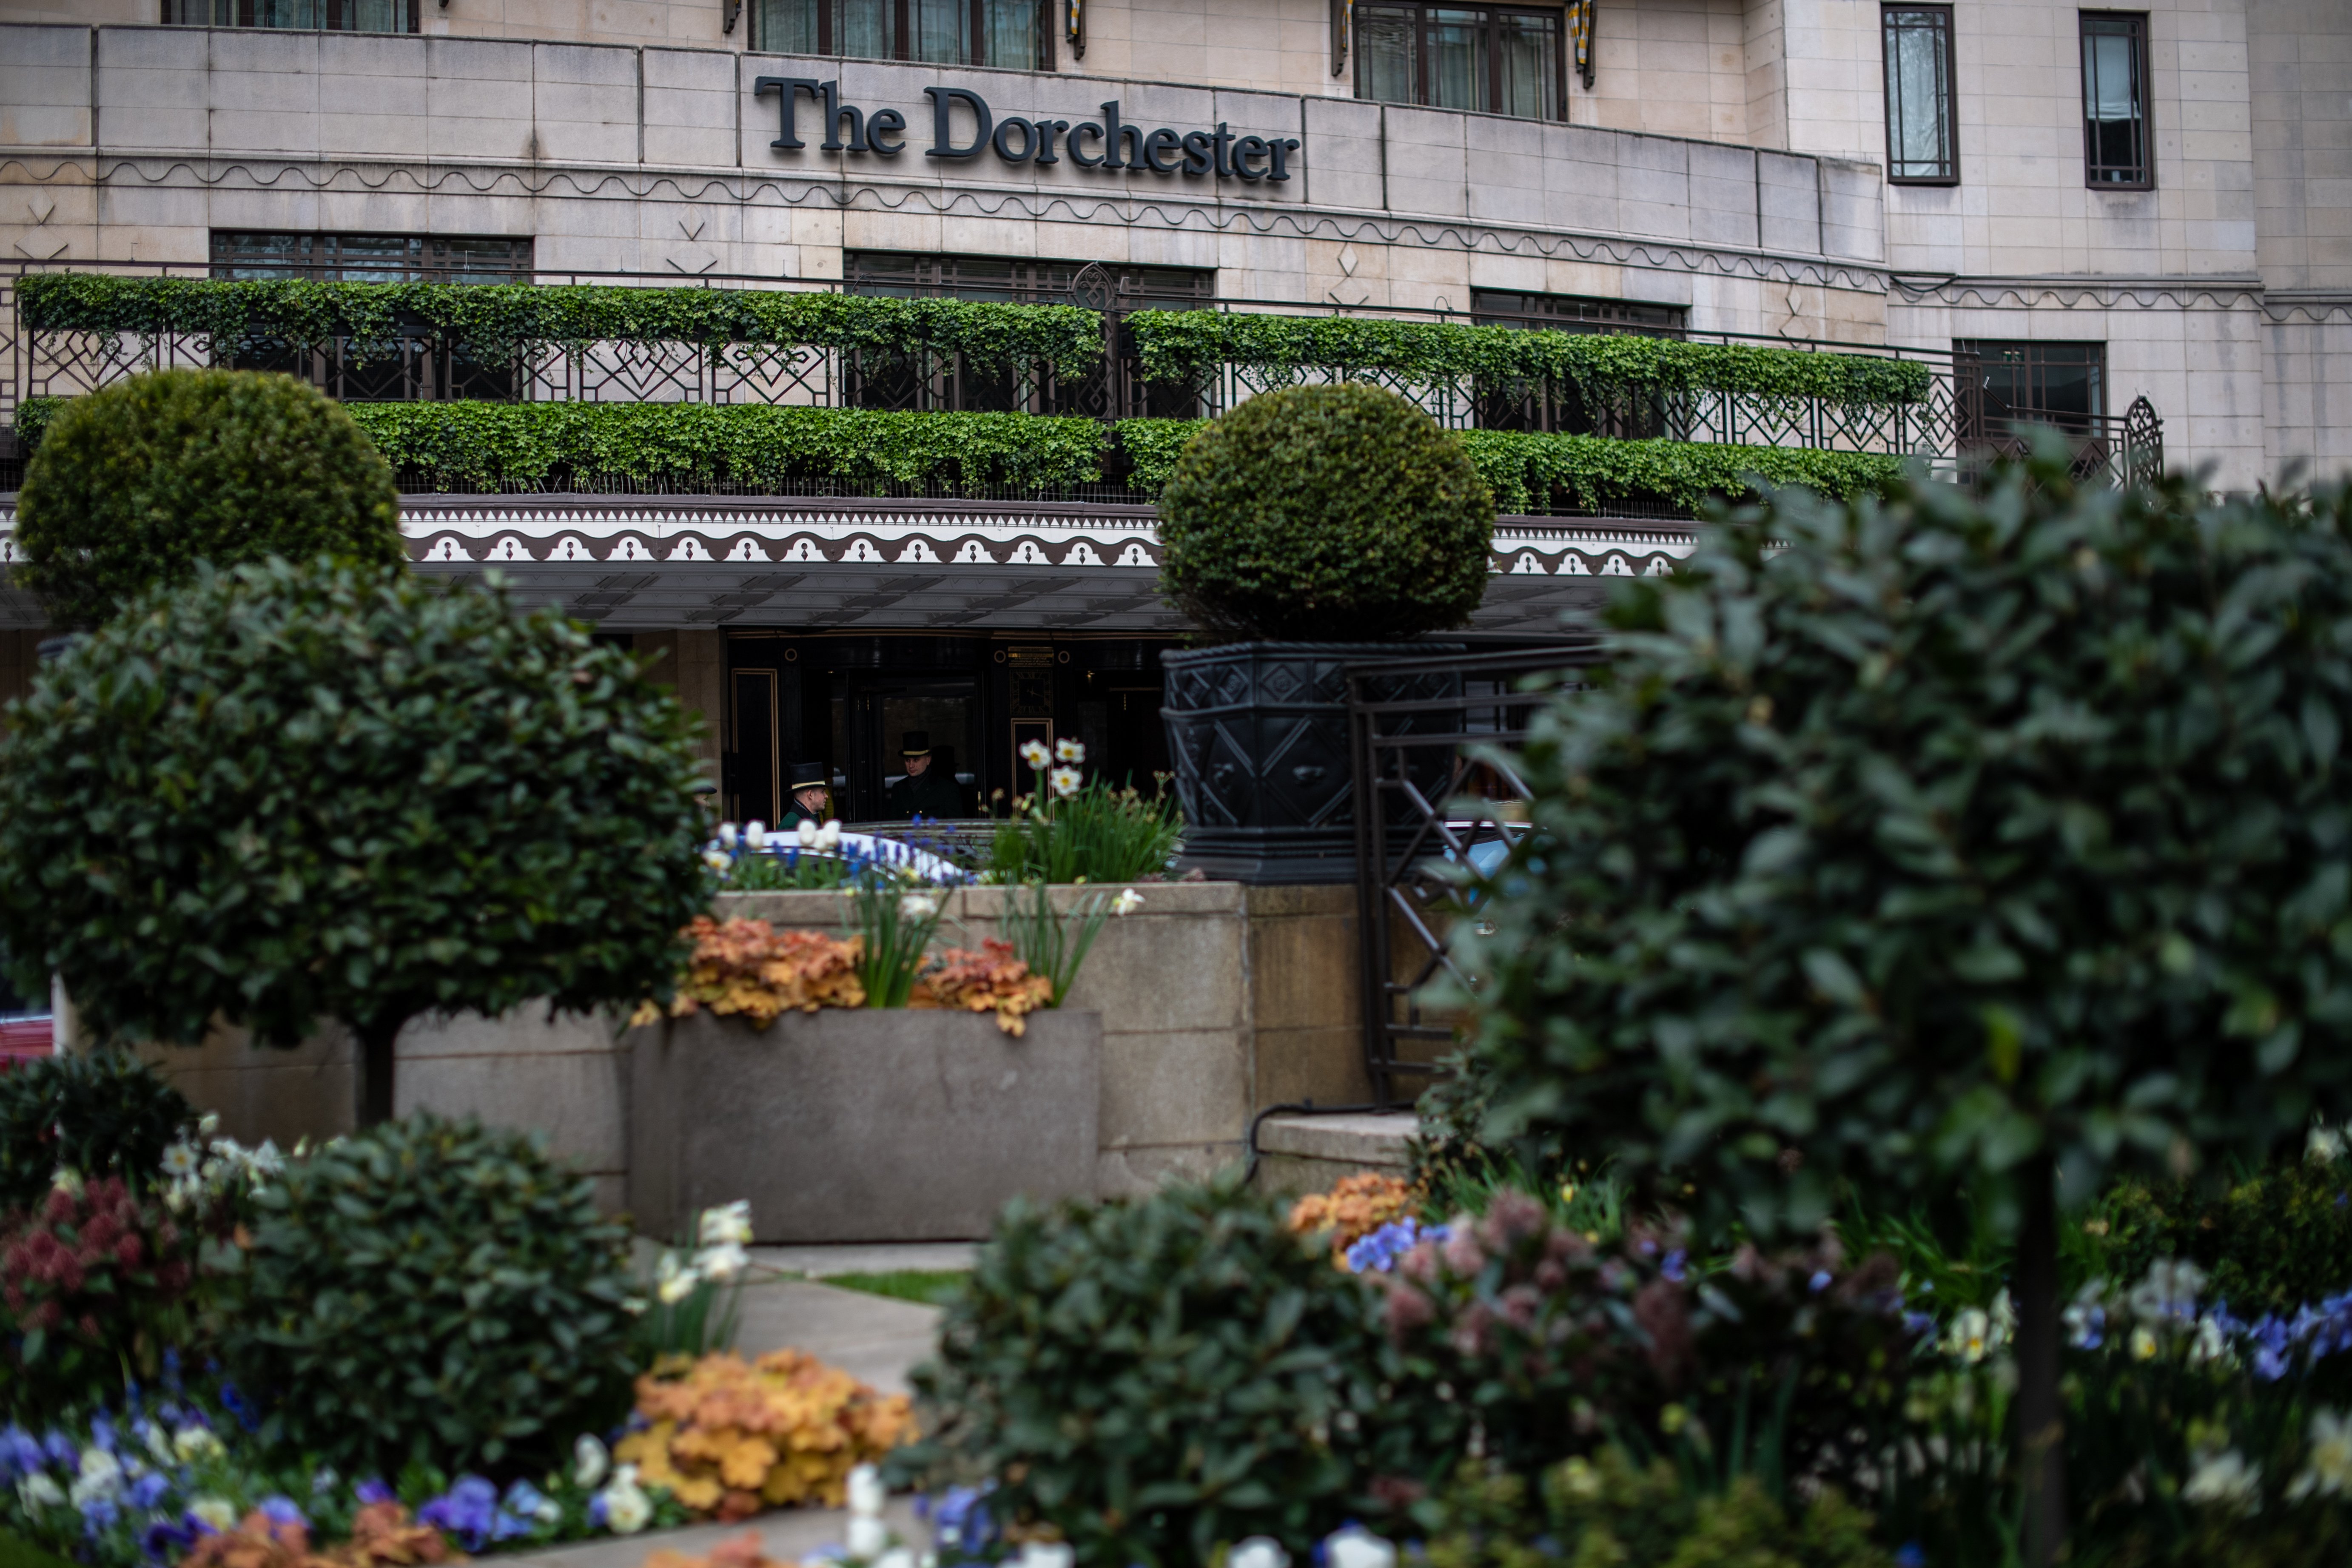 The front entrance is seen at The Dorchester, owned by the Sultan of Brunei, on April 3, 2019 in London, England. (Photo by Chris J Ratcliffe/Getty Images)